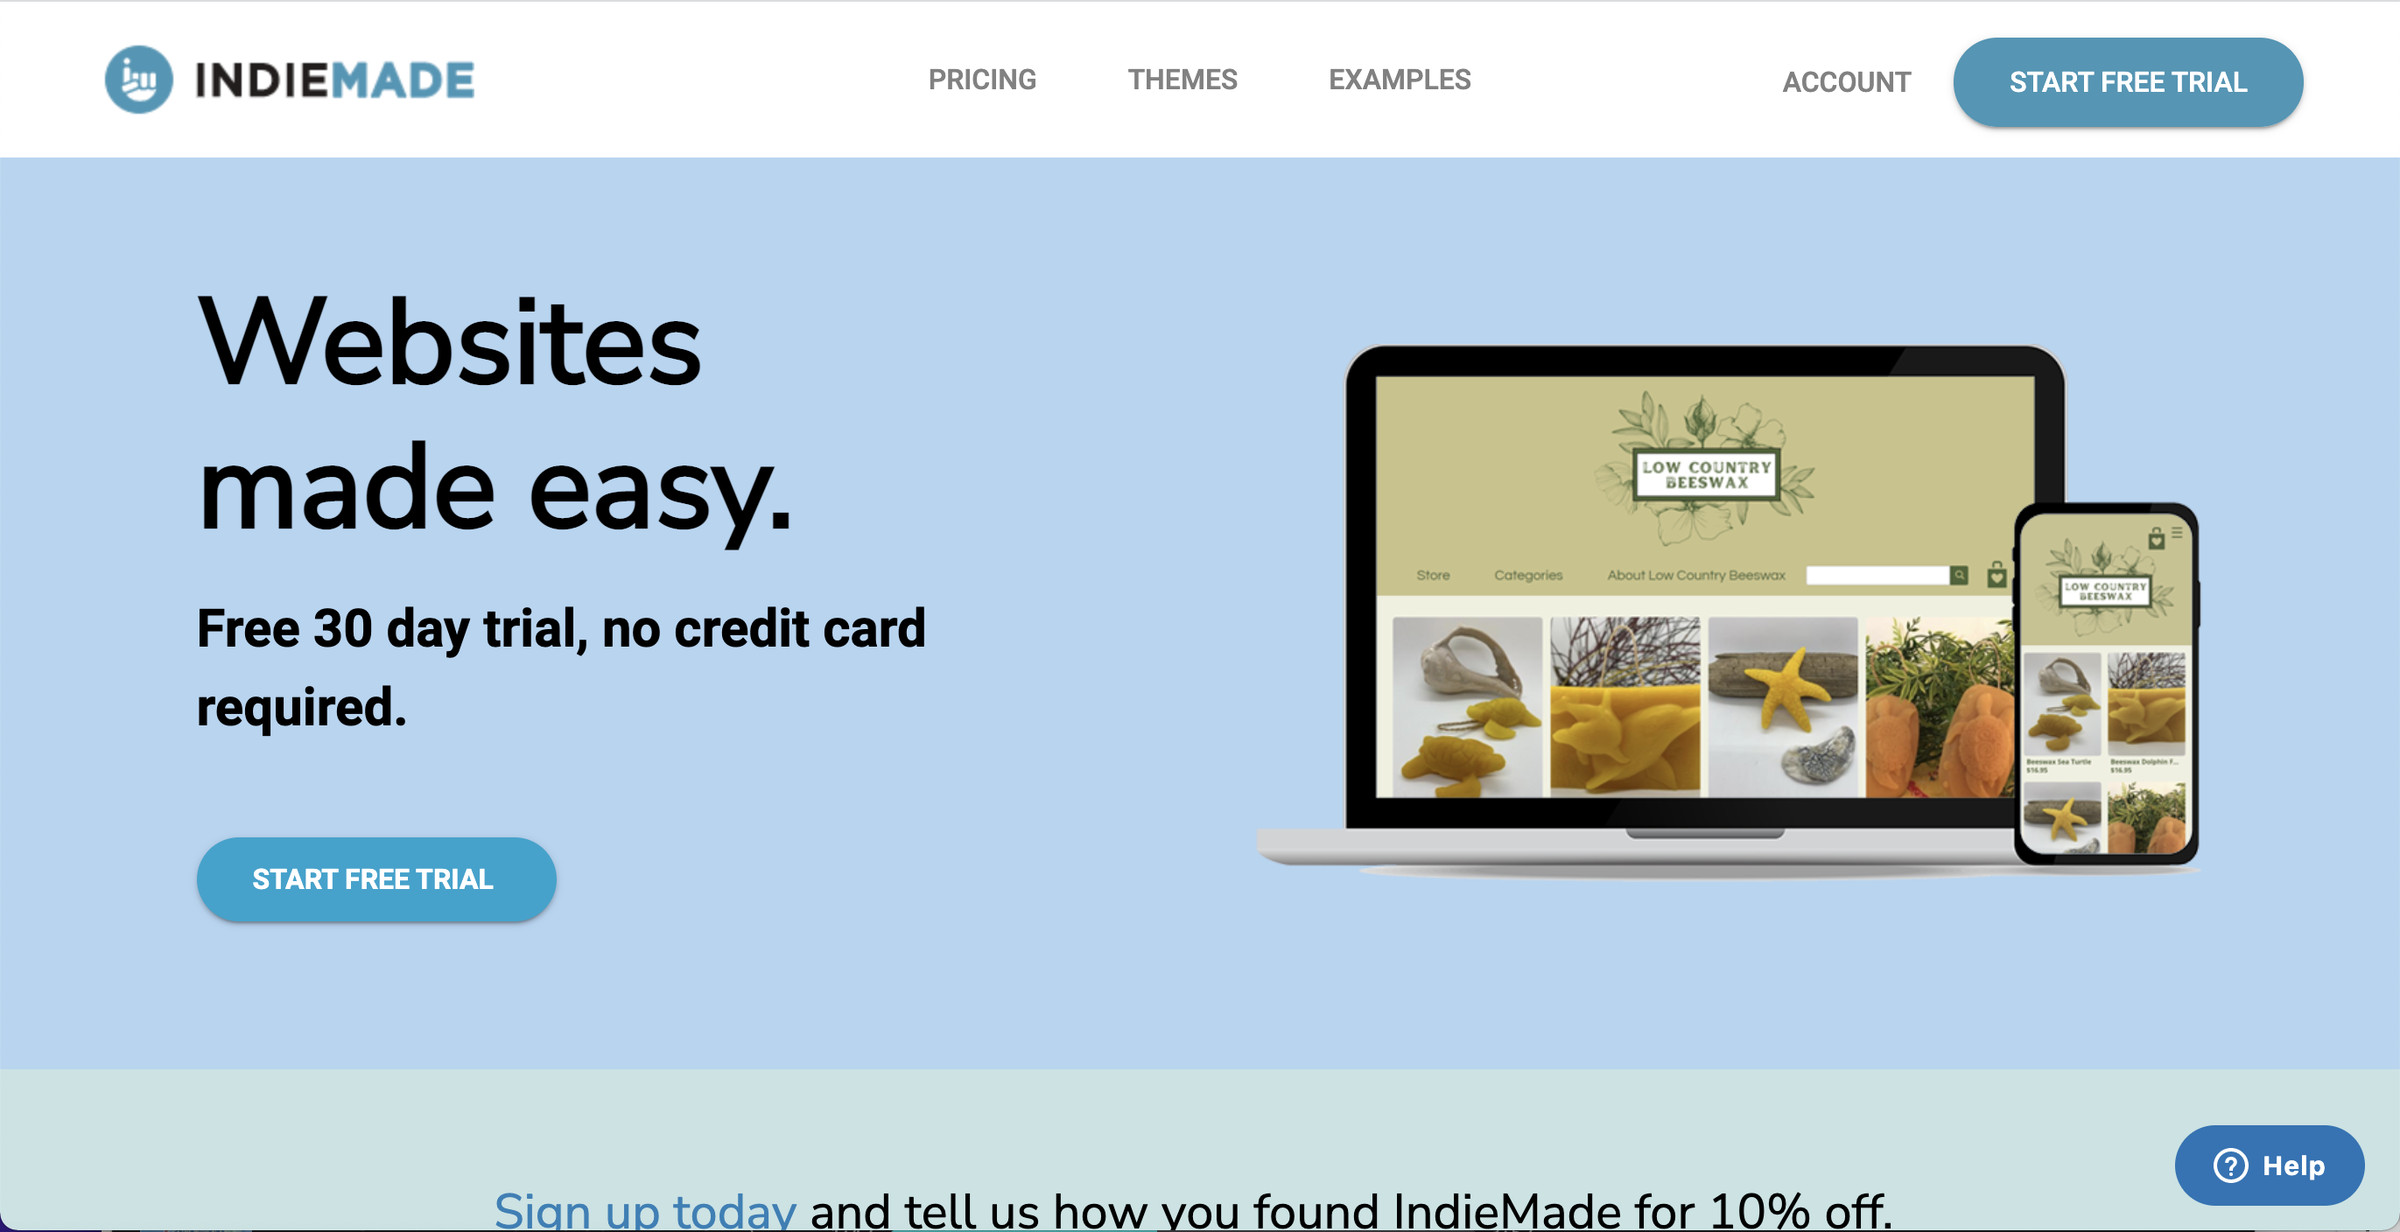 The IndieMade front page with a title “Websites made easy” on the left, and a photo of a laptop and a phone on the right.